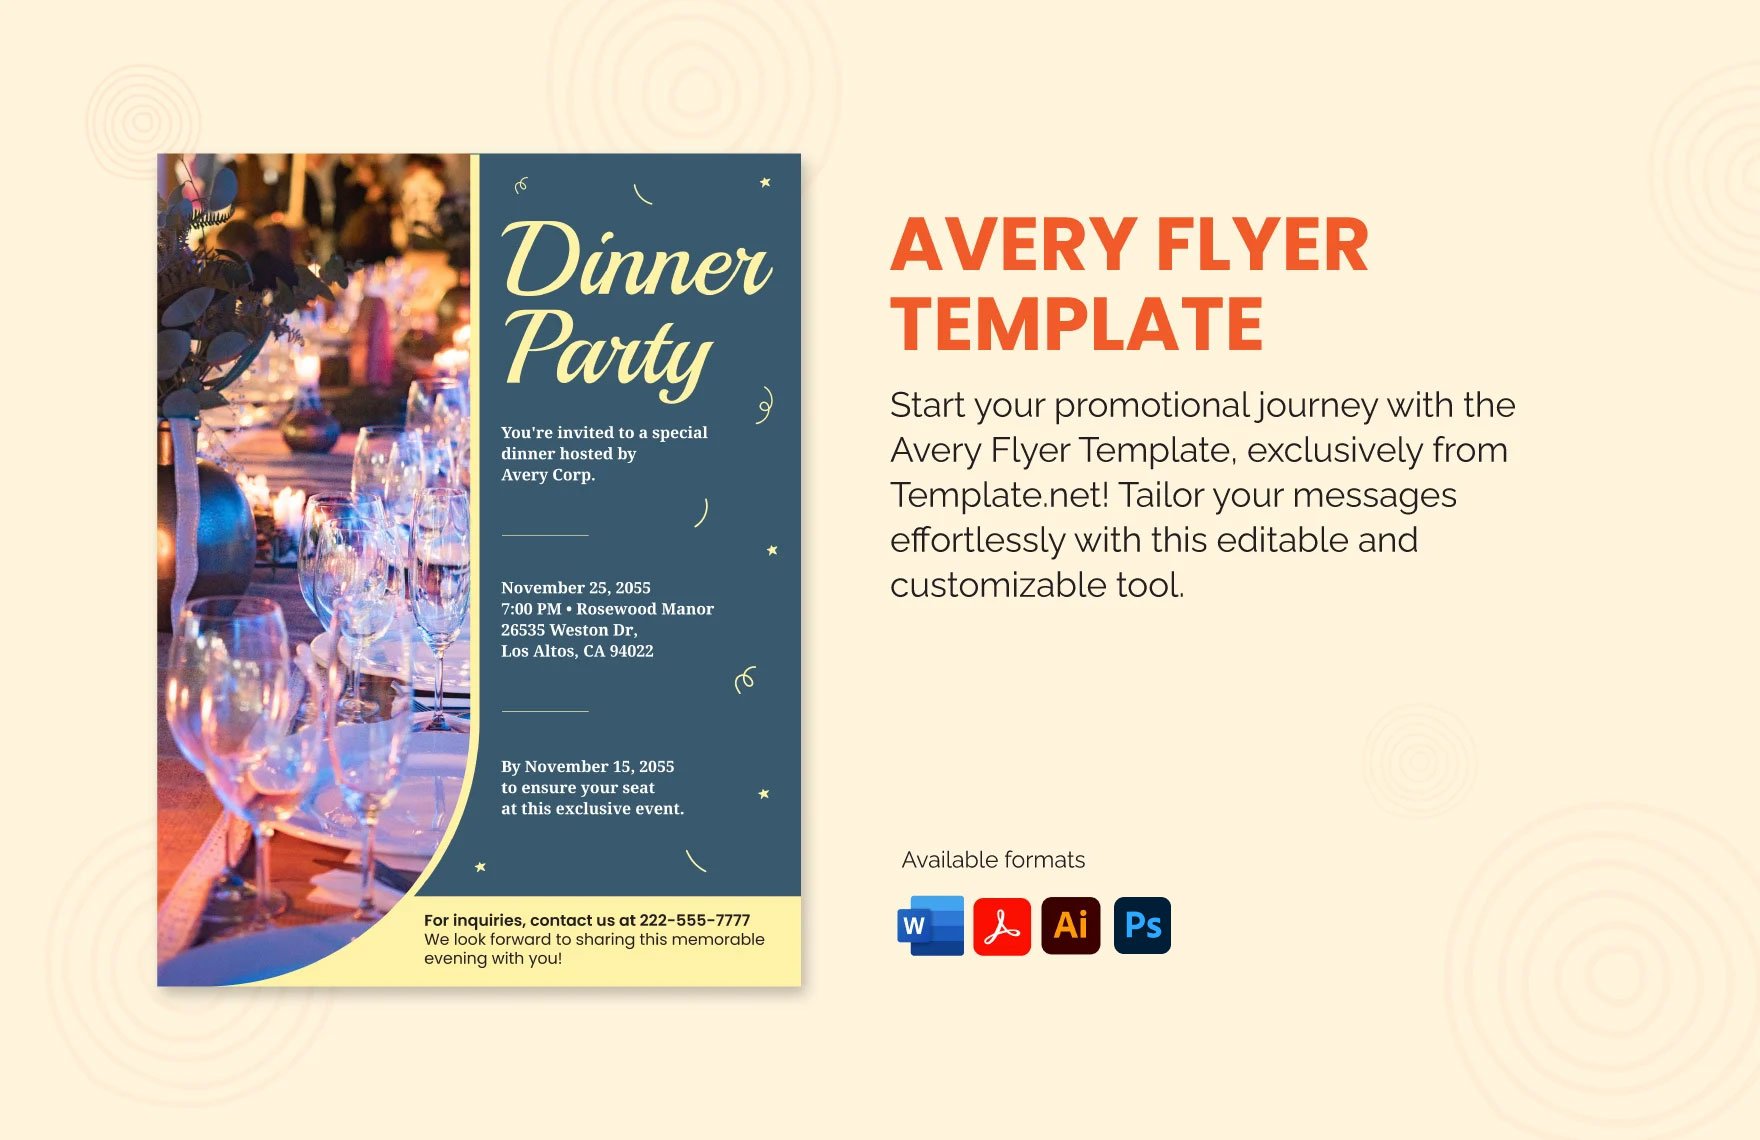 Avery Flyer Template